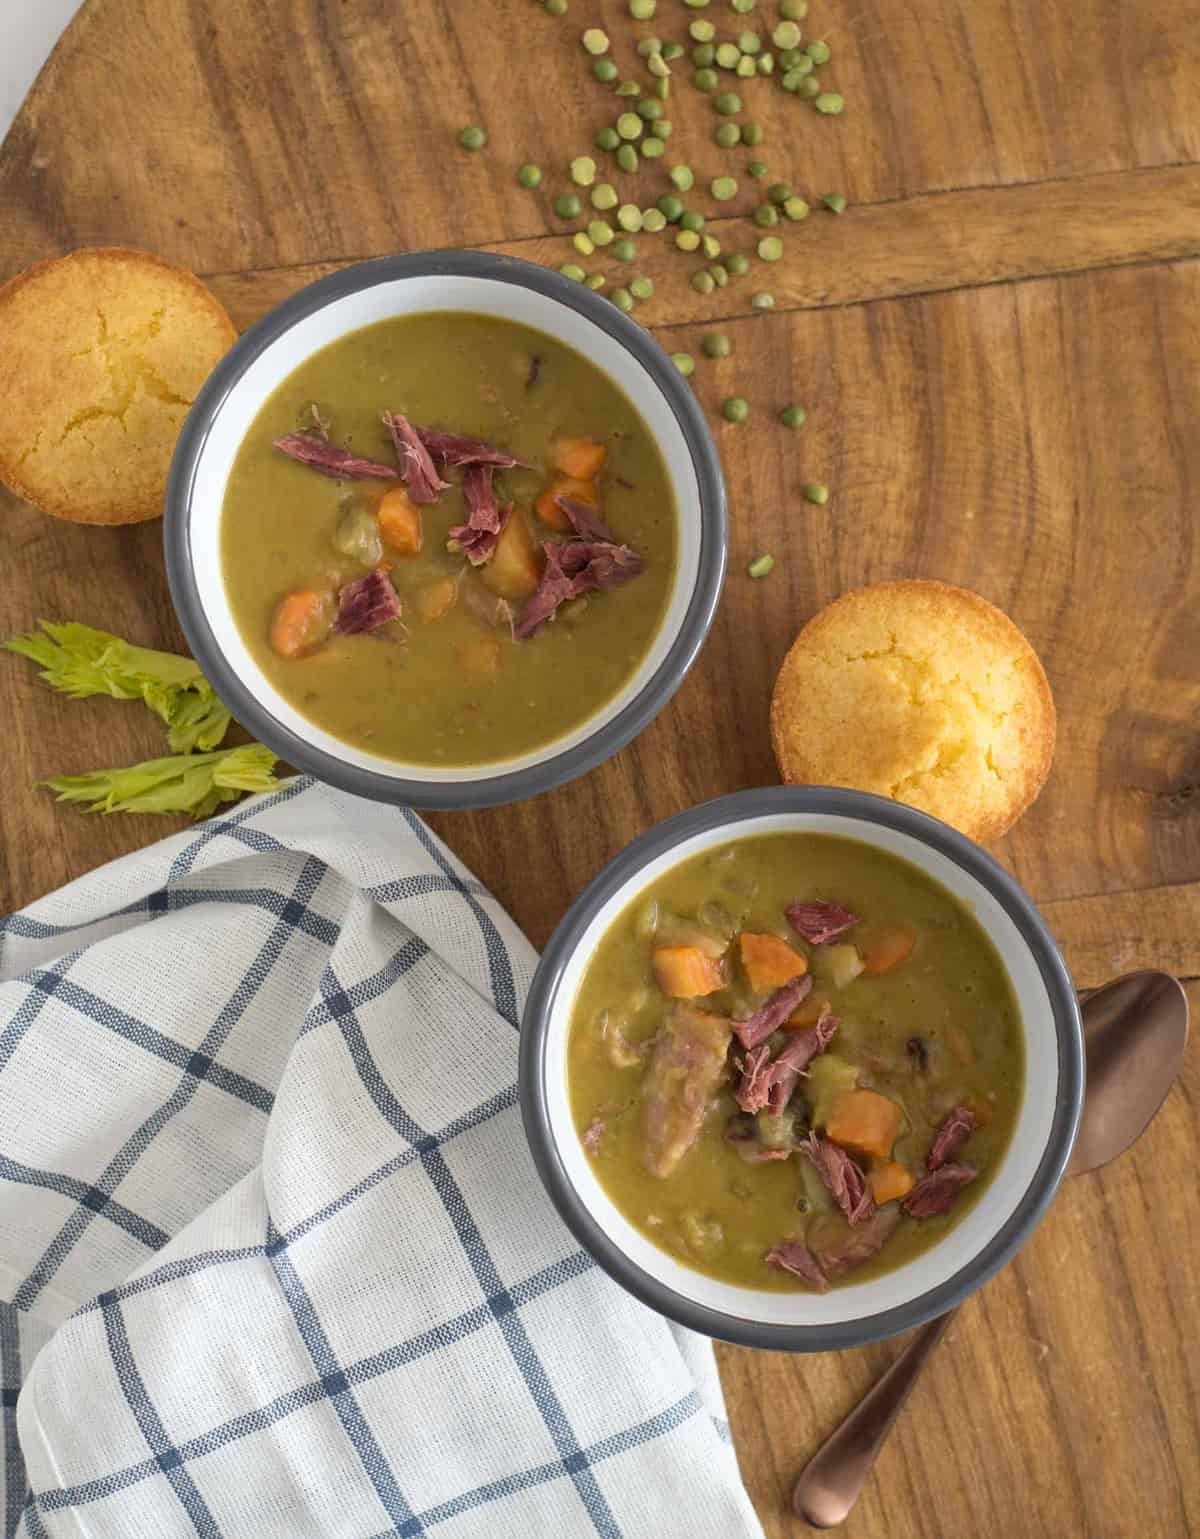 Quick and easy Instant Pot Split Pea Soup made with just a few ingredients and done in about 4o minutes start to finish.